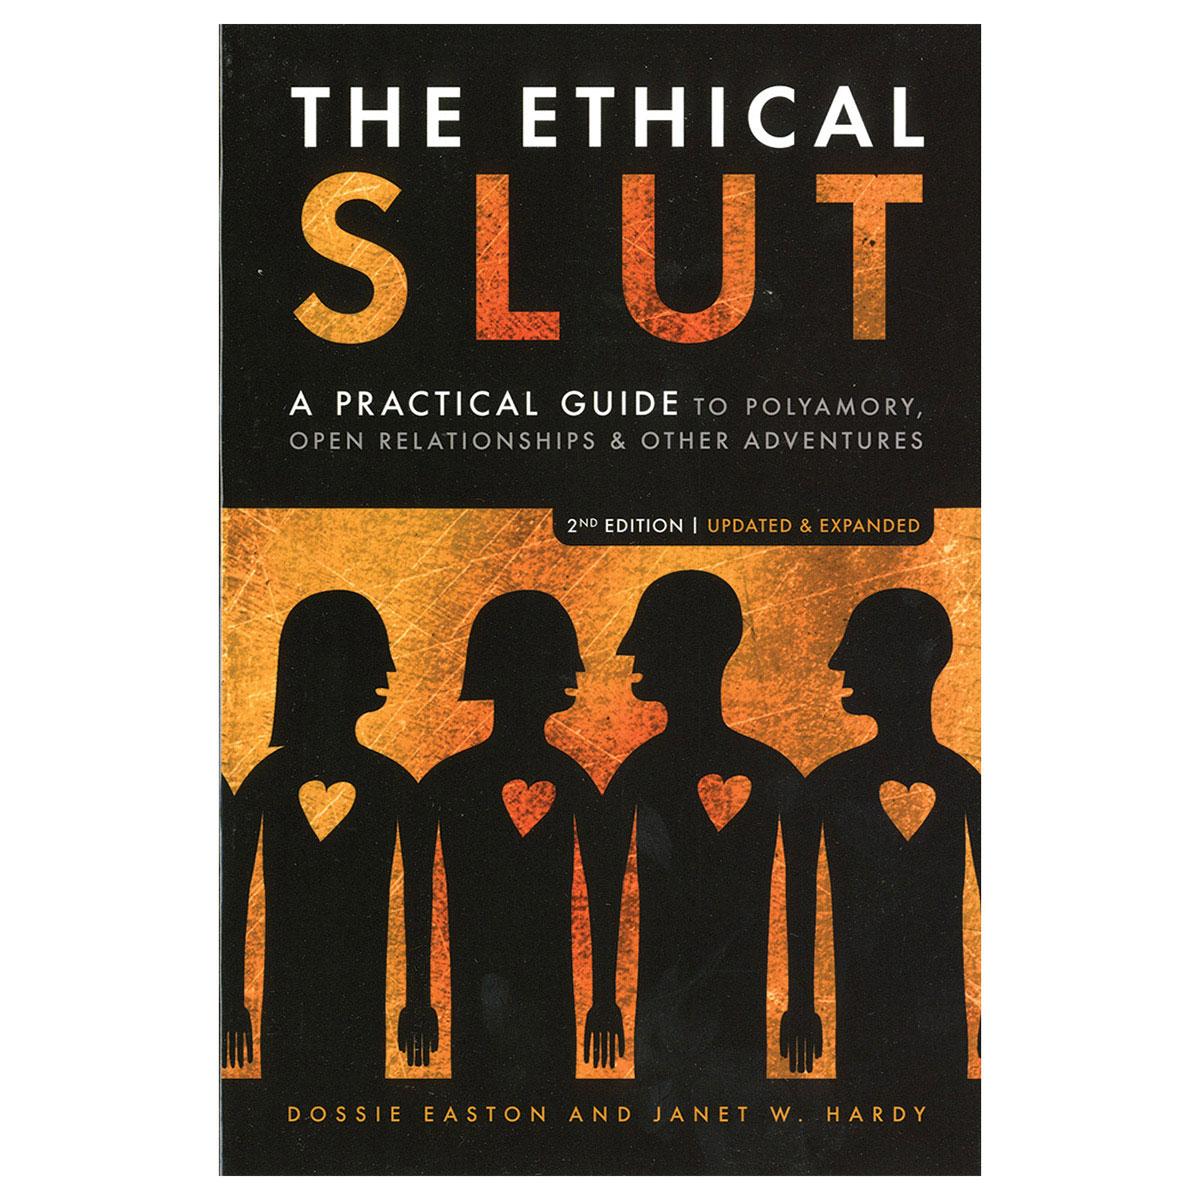 The Ethical Slut - Best Selling Guide for Ethical Polyamory - Kink Store